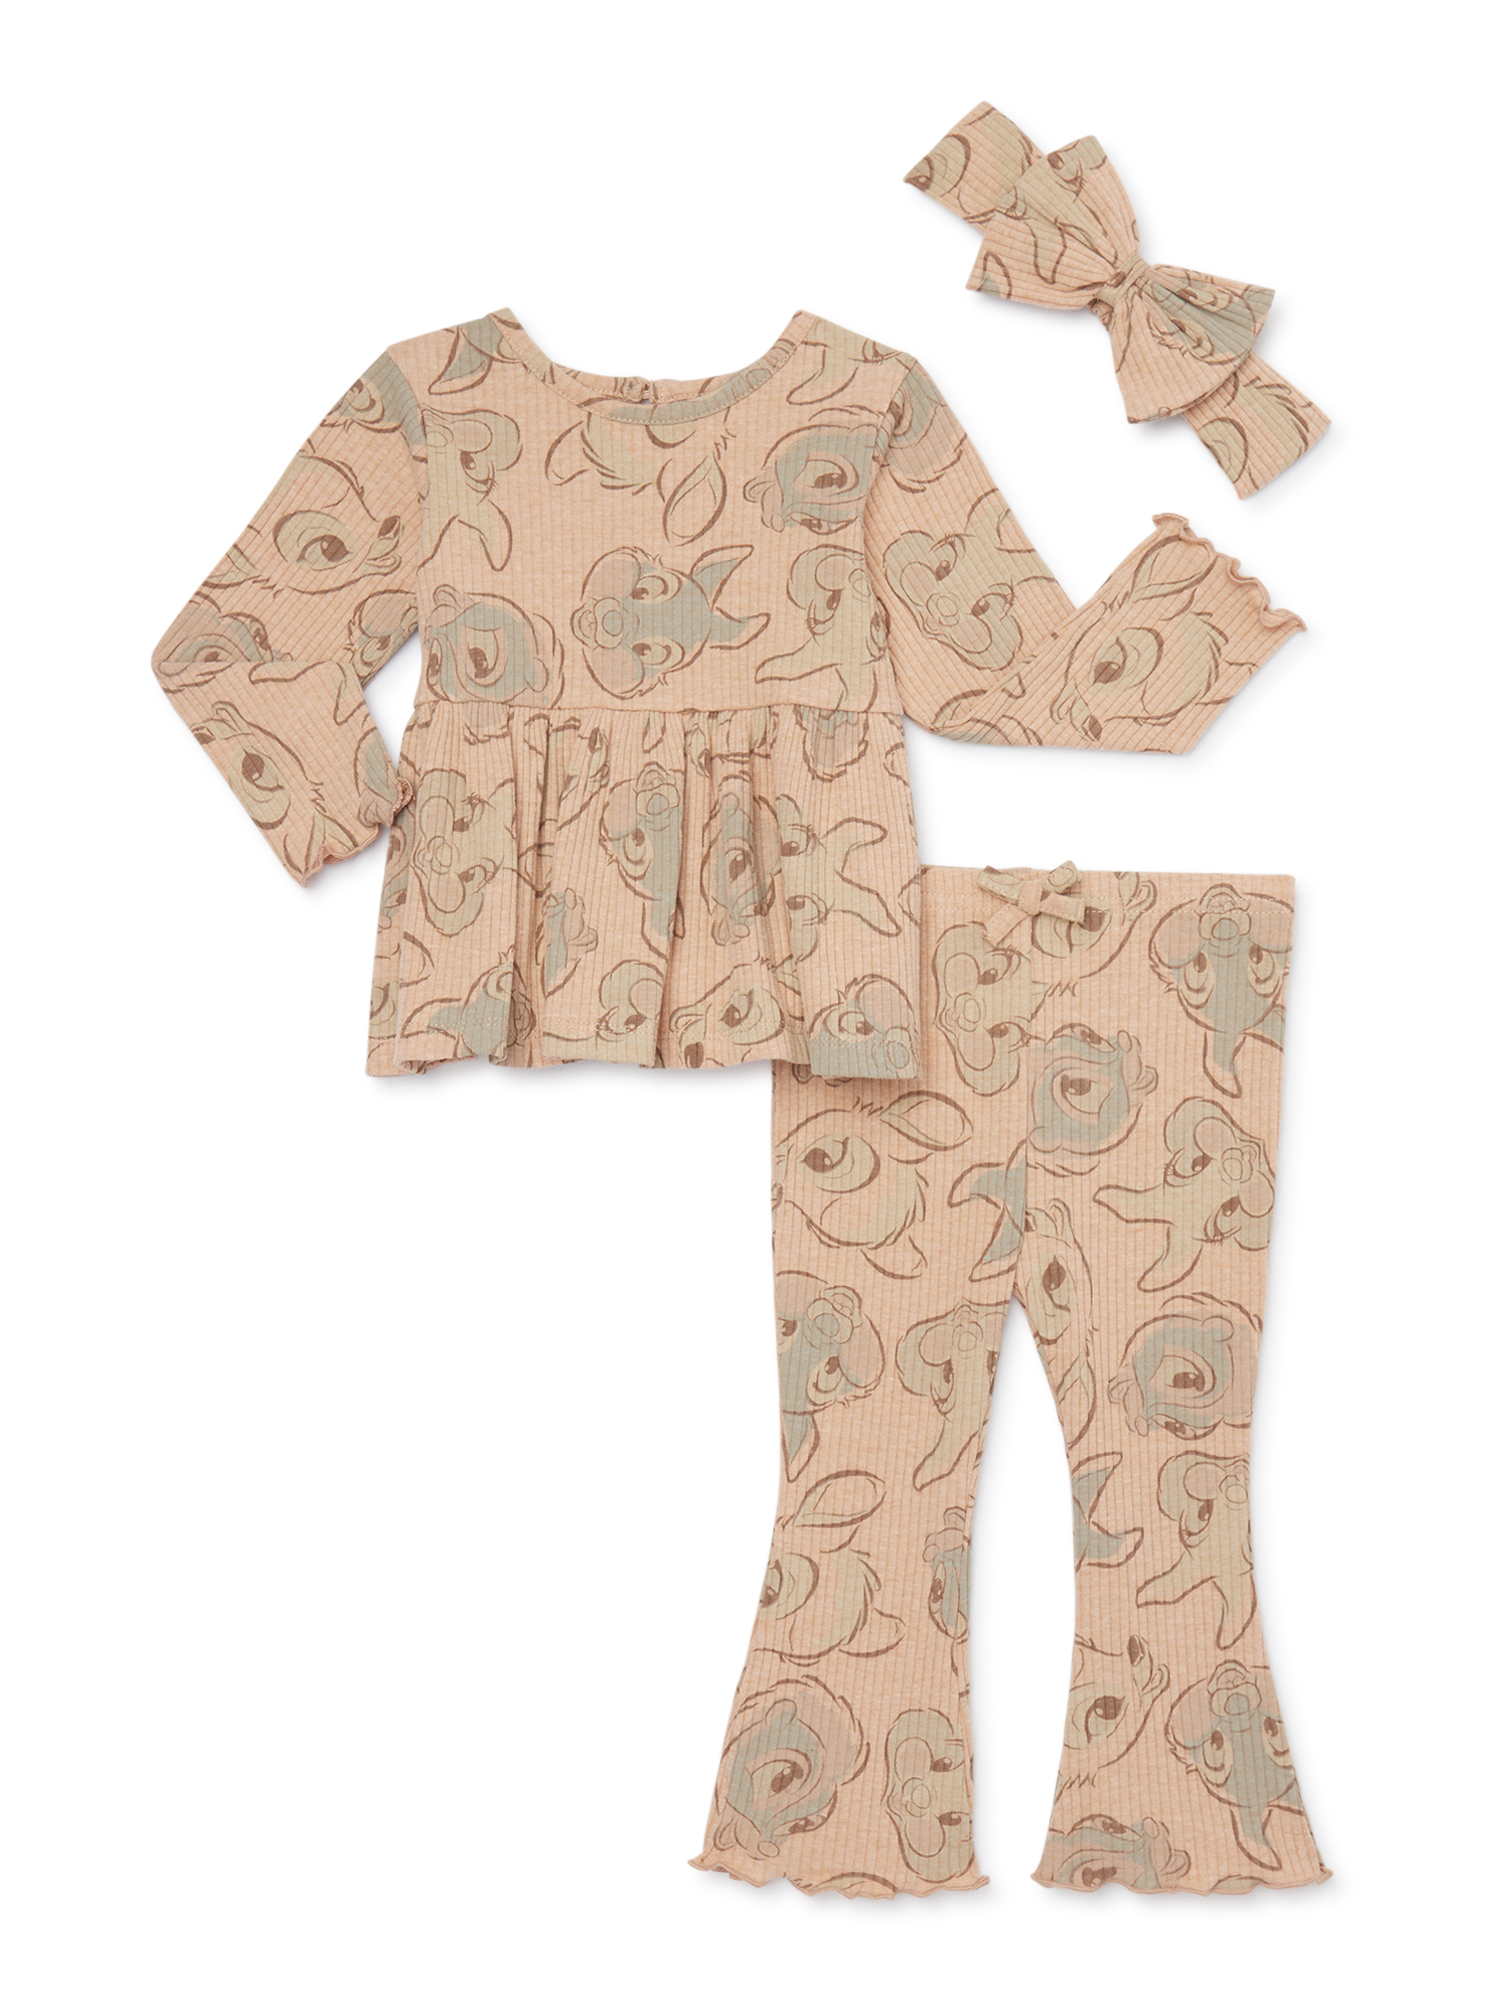 Disney Bambi Baby Girls Top, Pants and Headband, 3-Piece Set, Sizes 0/3-24 Months - image 1 of 7